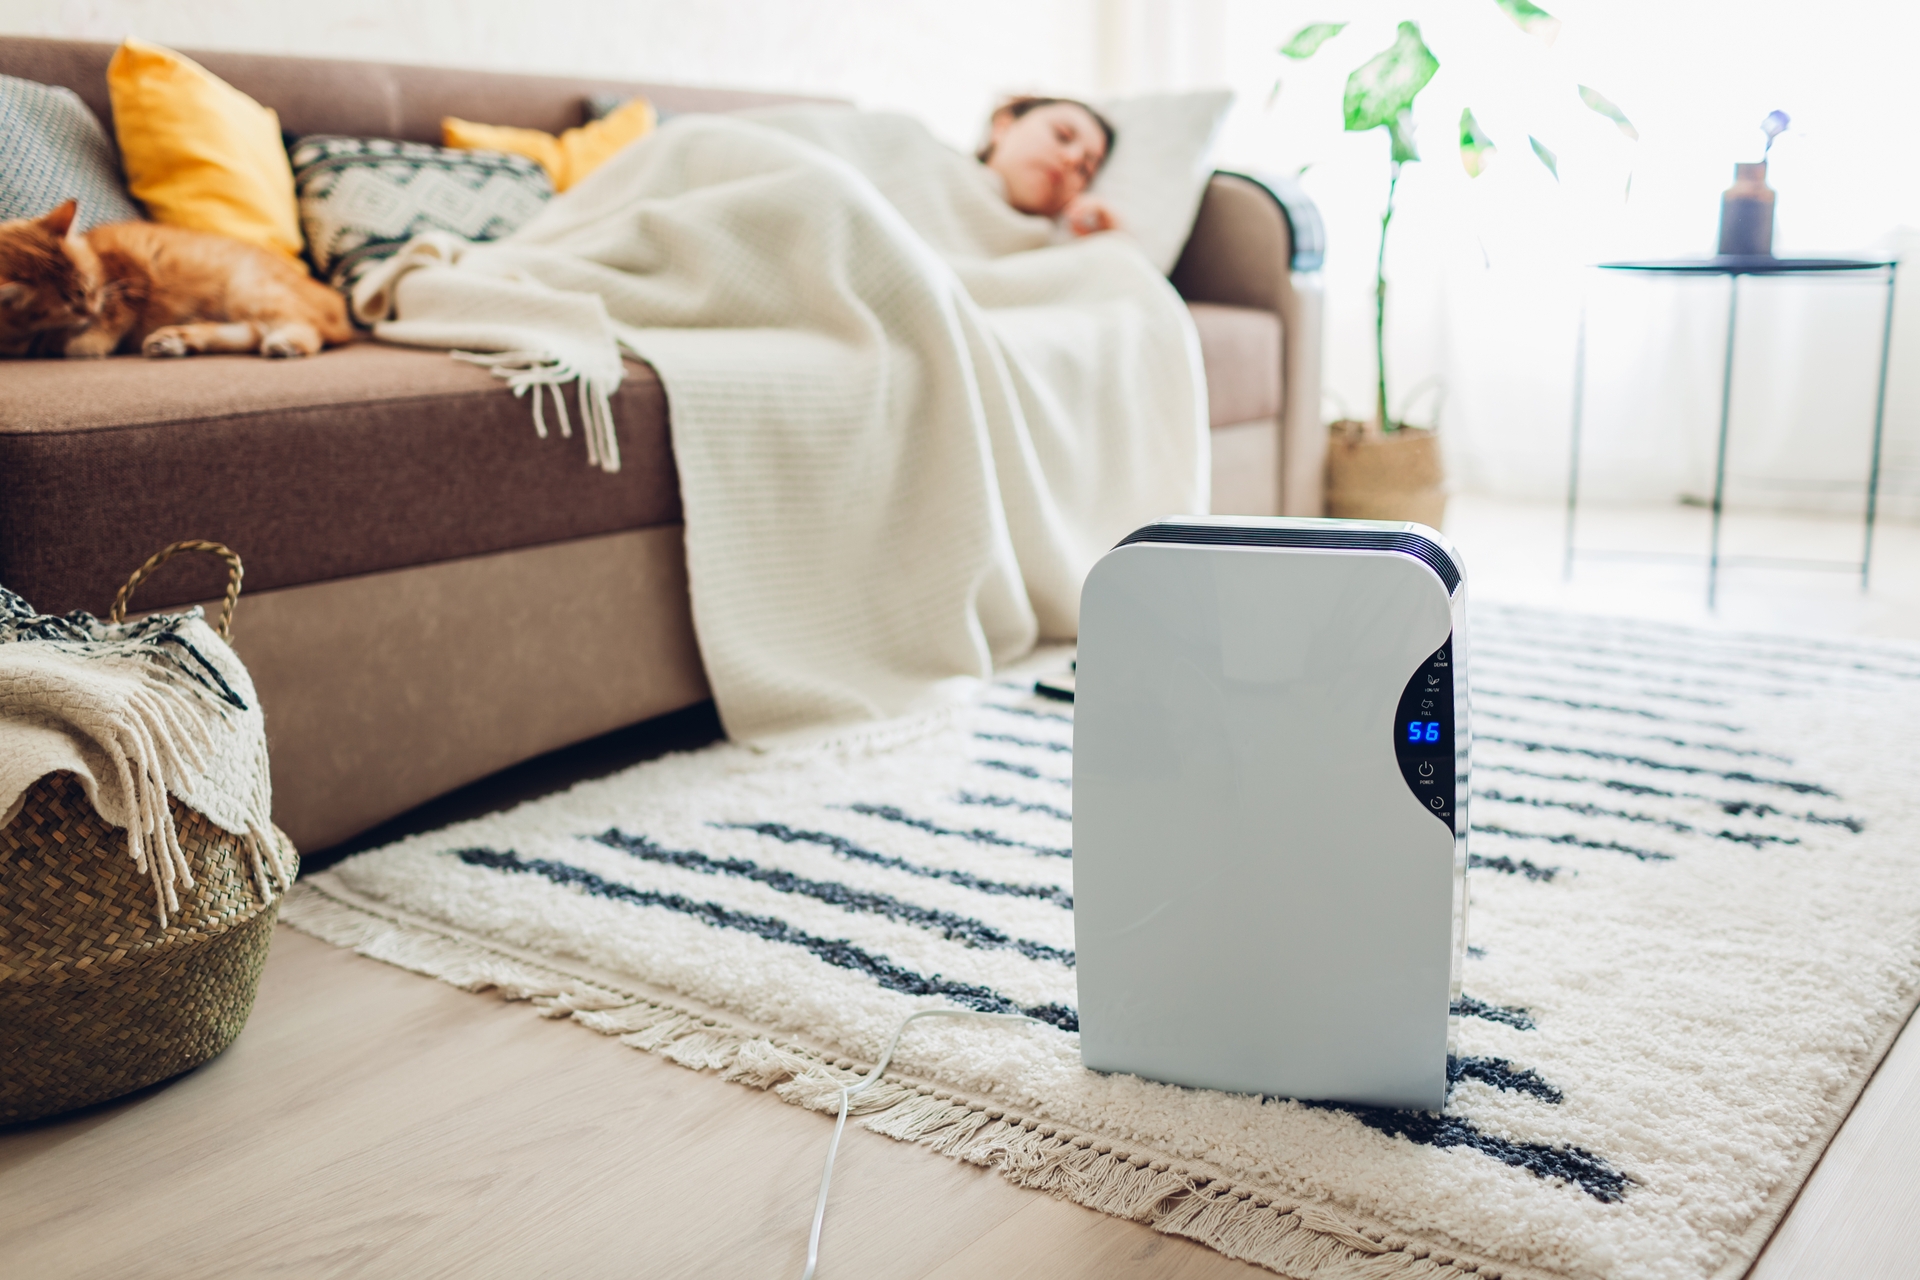 Header Woman On Couch With Humidifier In Floor